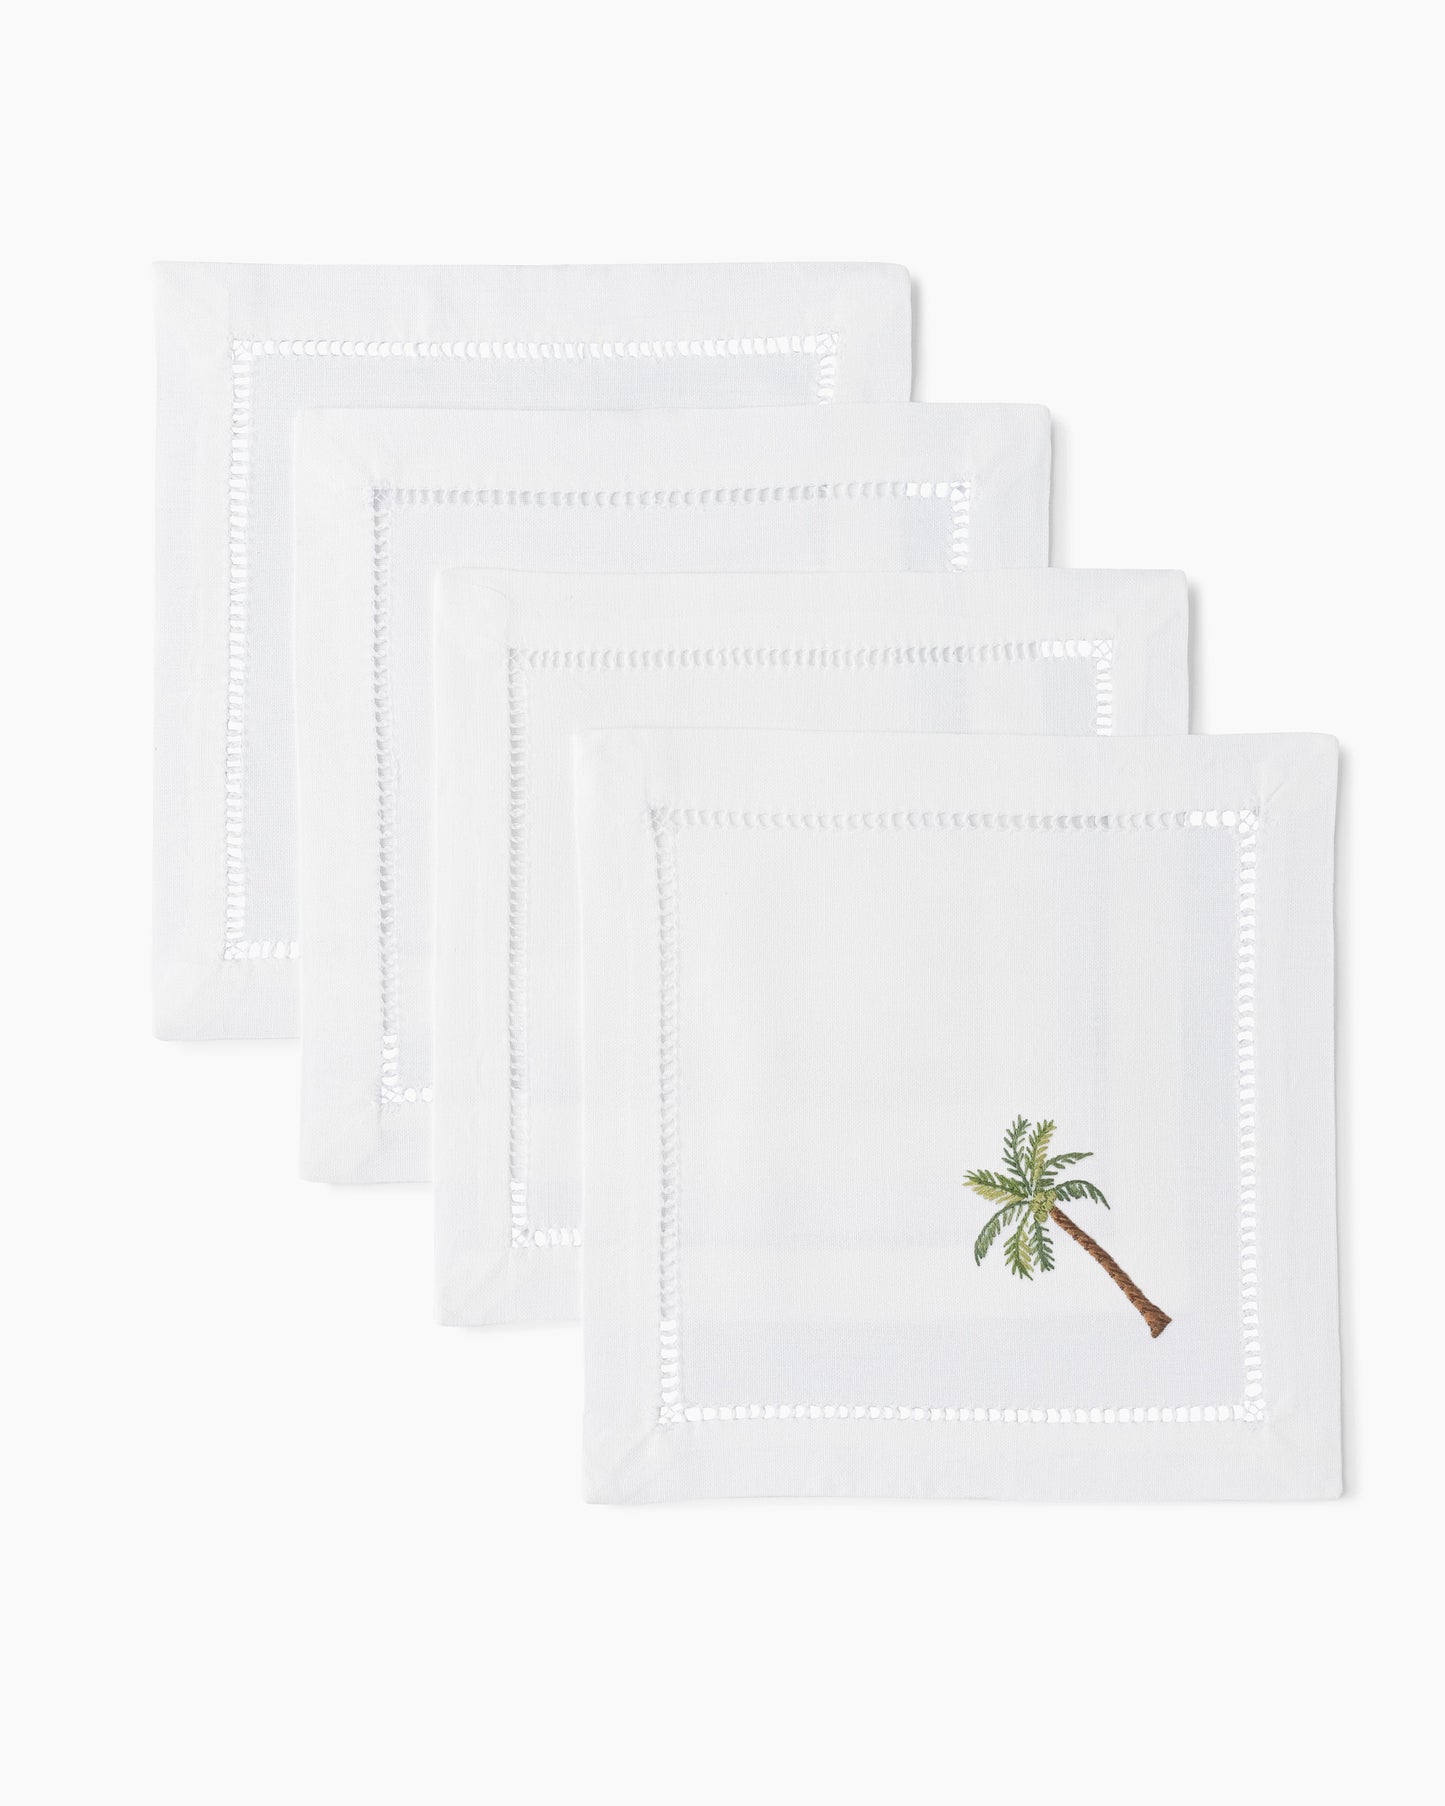 Four white Palm Tree Modern Cocktail Napkin Sets by Henry Handwork with palm trees on them.